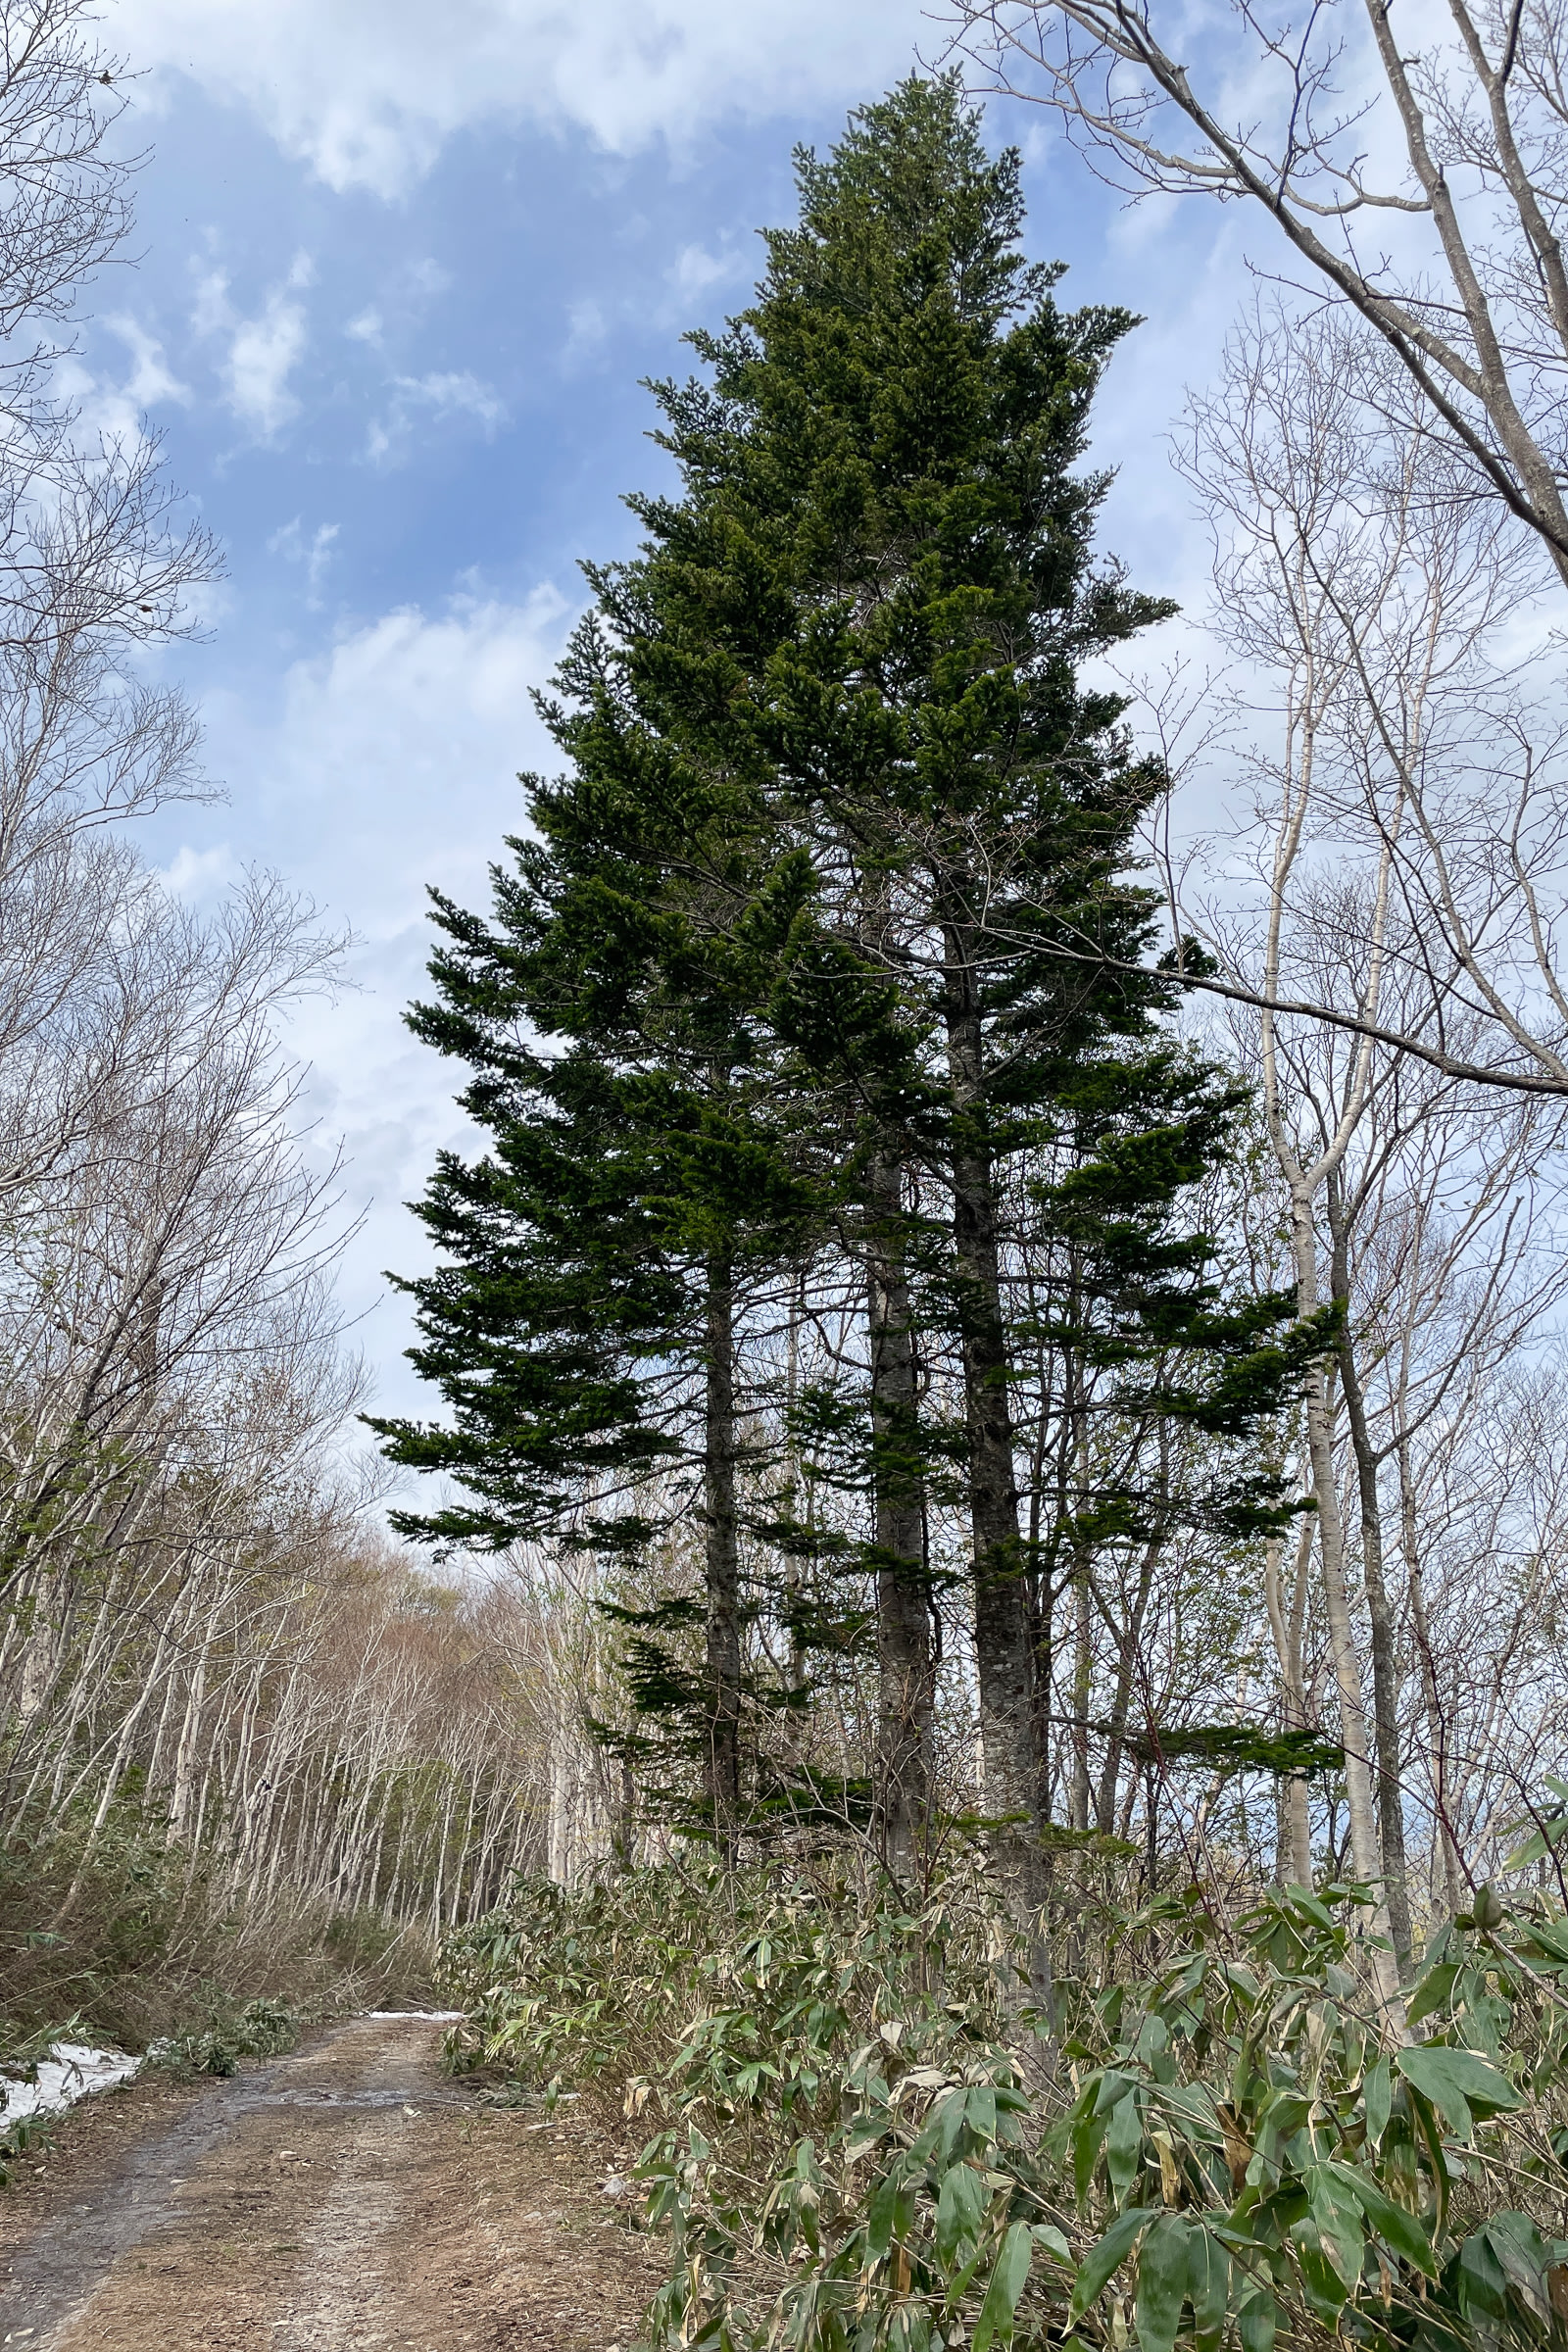 Sakhalin Firs found along the hiking trails of Otoe Mountain Ranges in May.